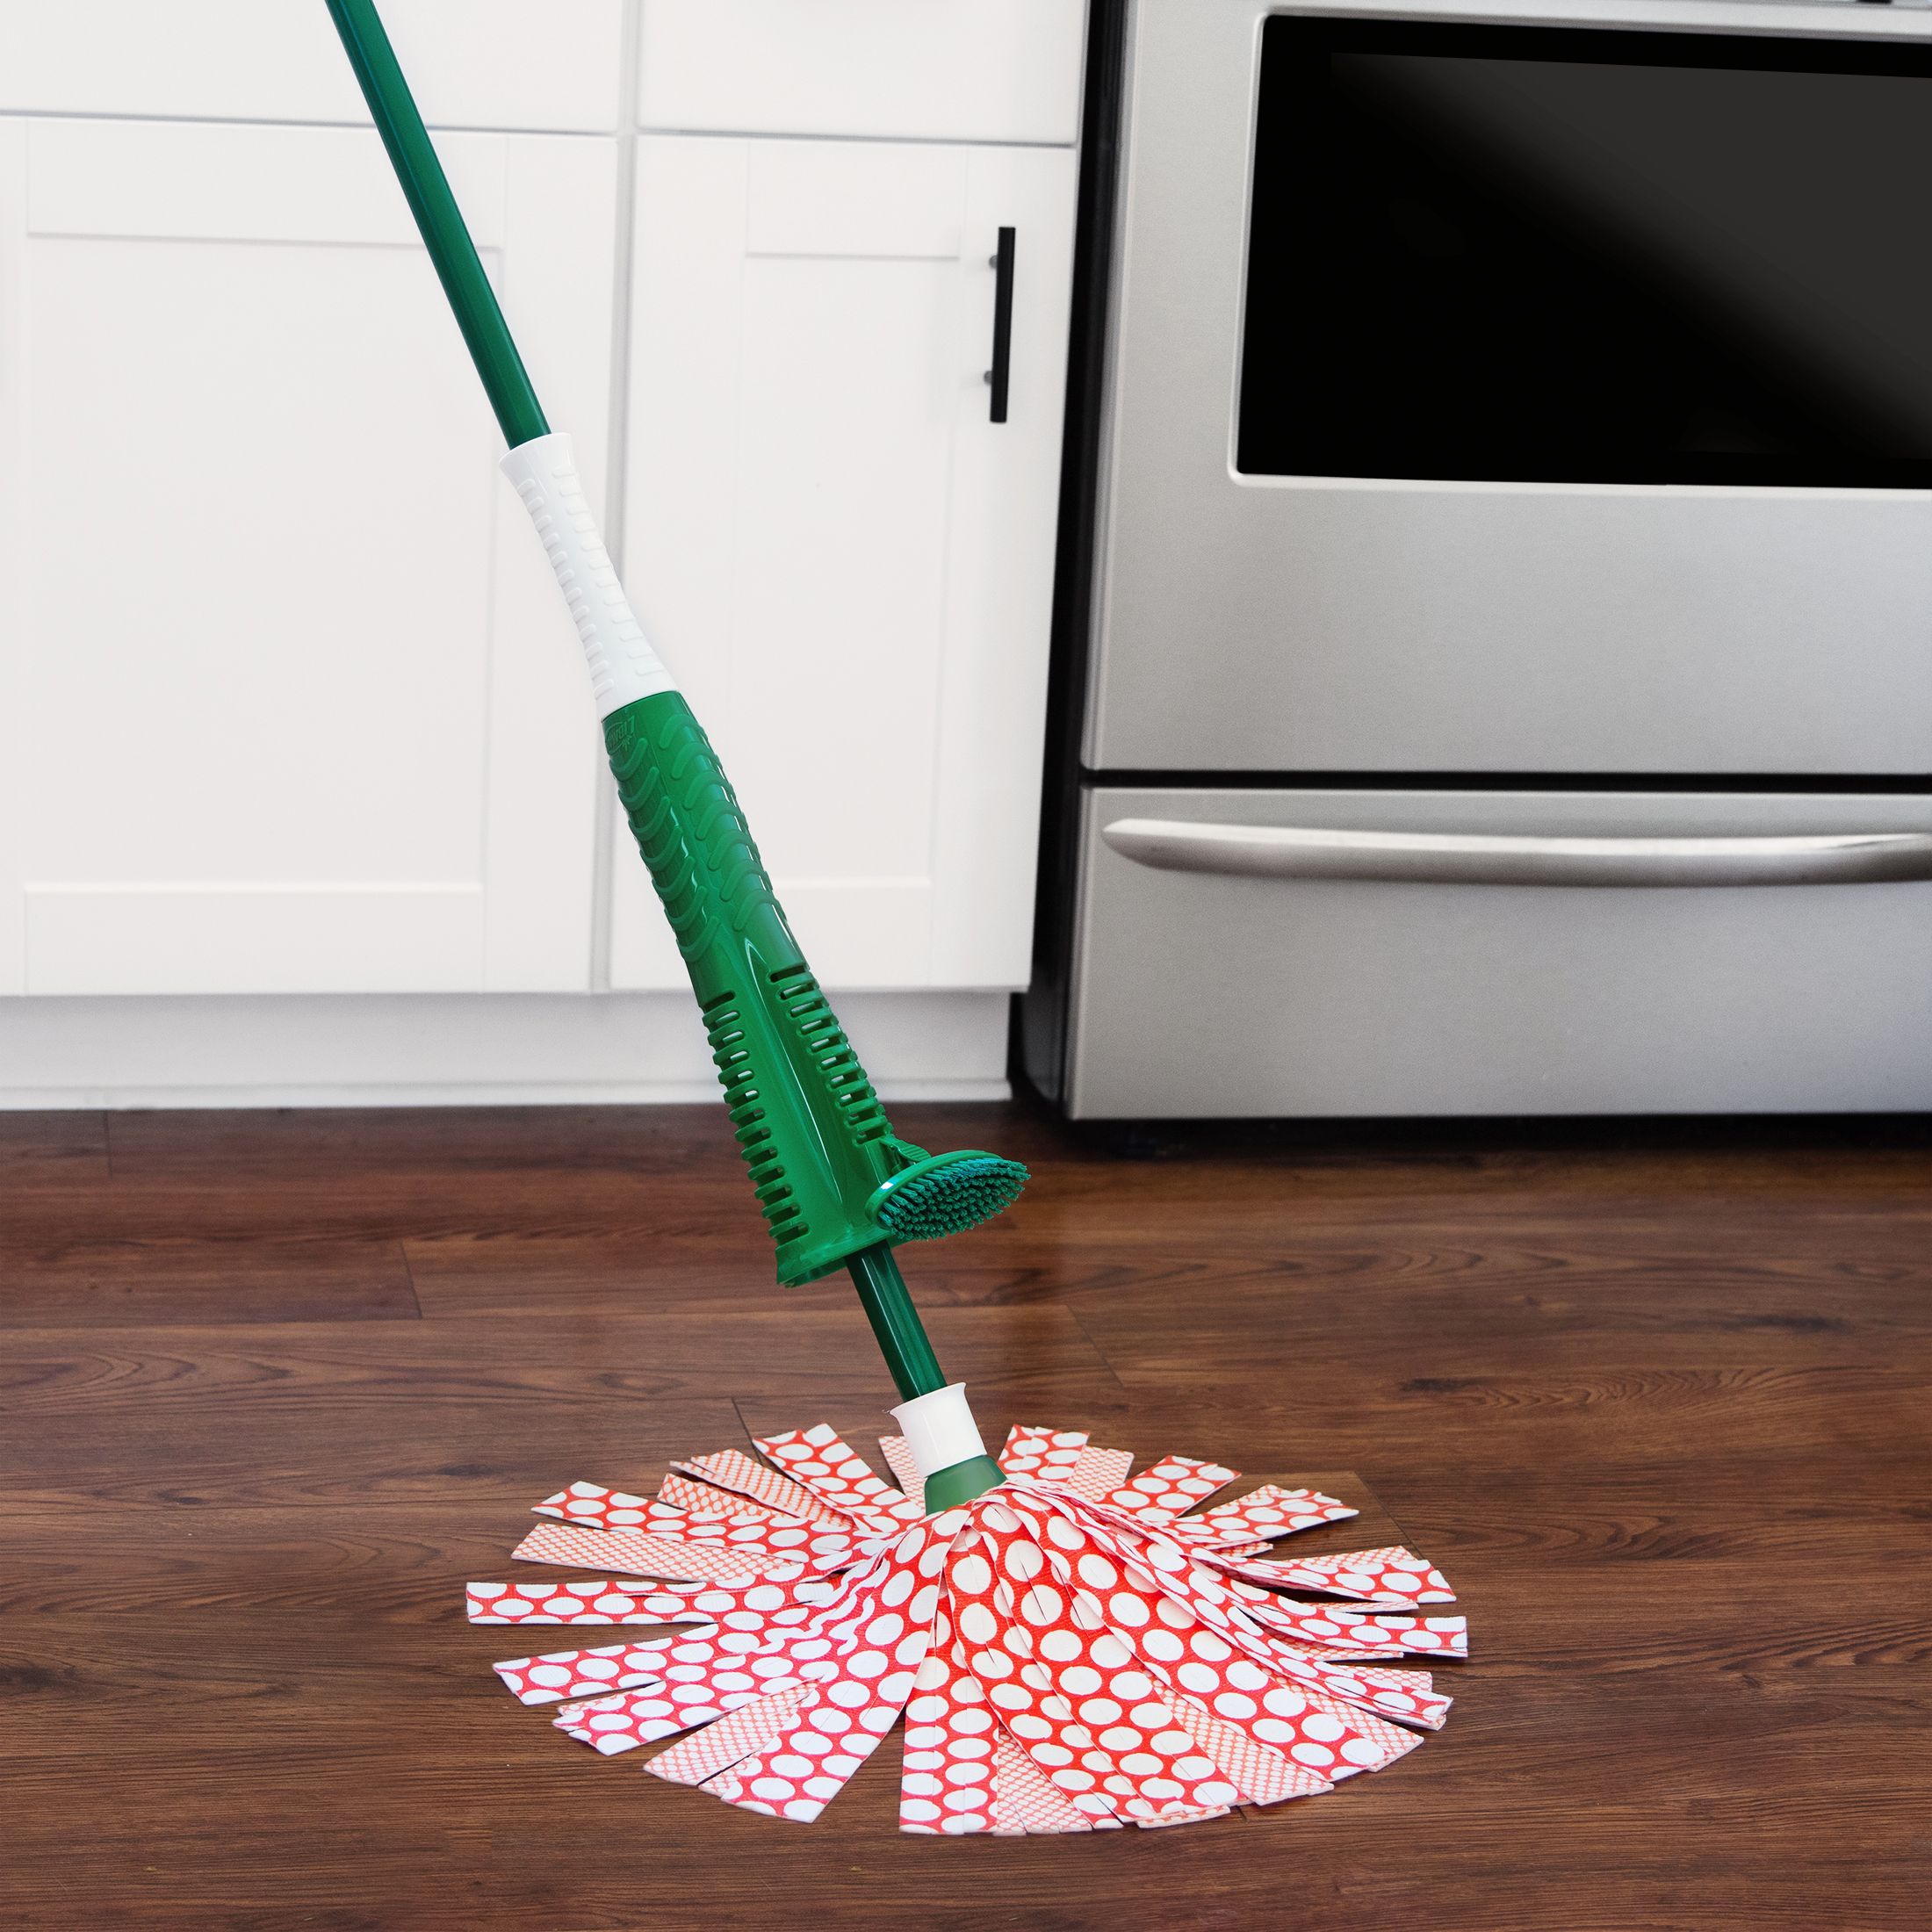 Libman Wonder Mop. ® Green and White Handle. - image 4 of 6